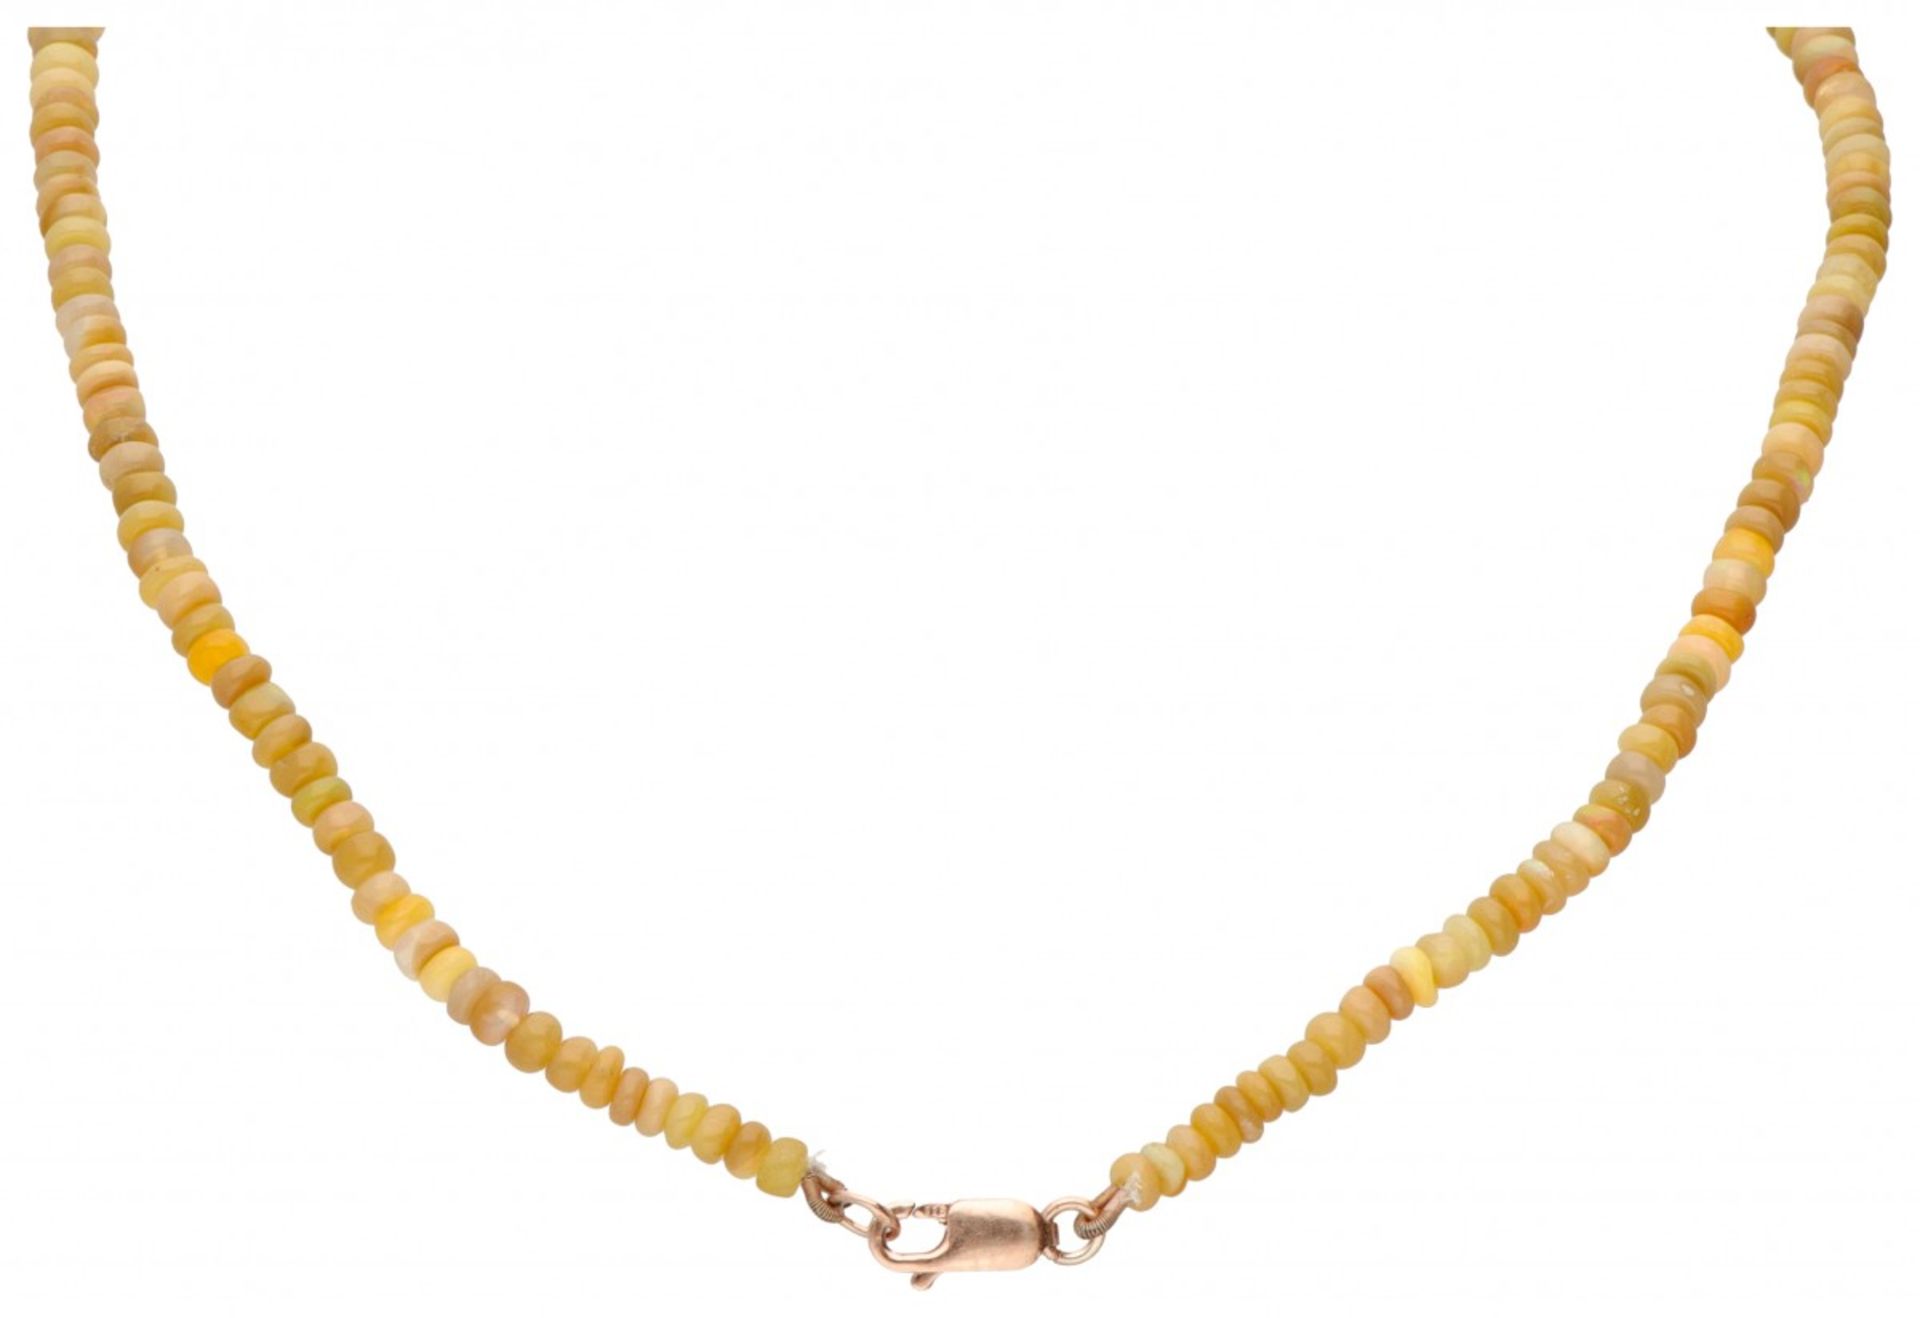 Single strand necklace with a rose gold-plated 925/1000 silver closure, completely set with natural  - Image 2 of 2